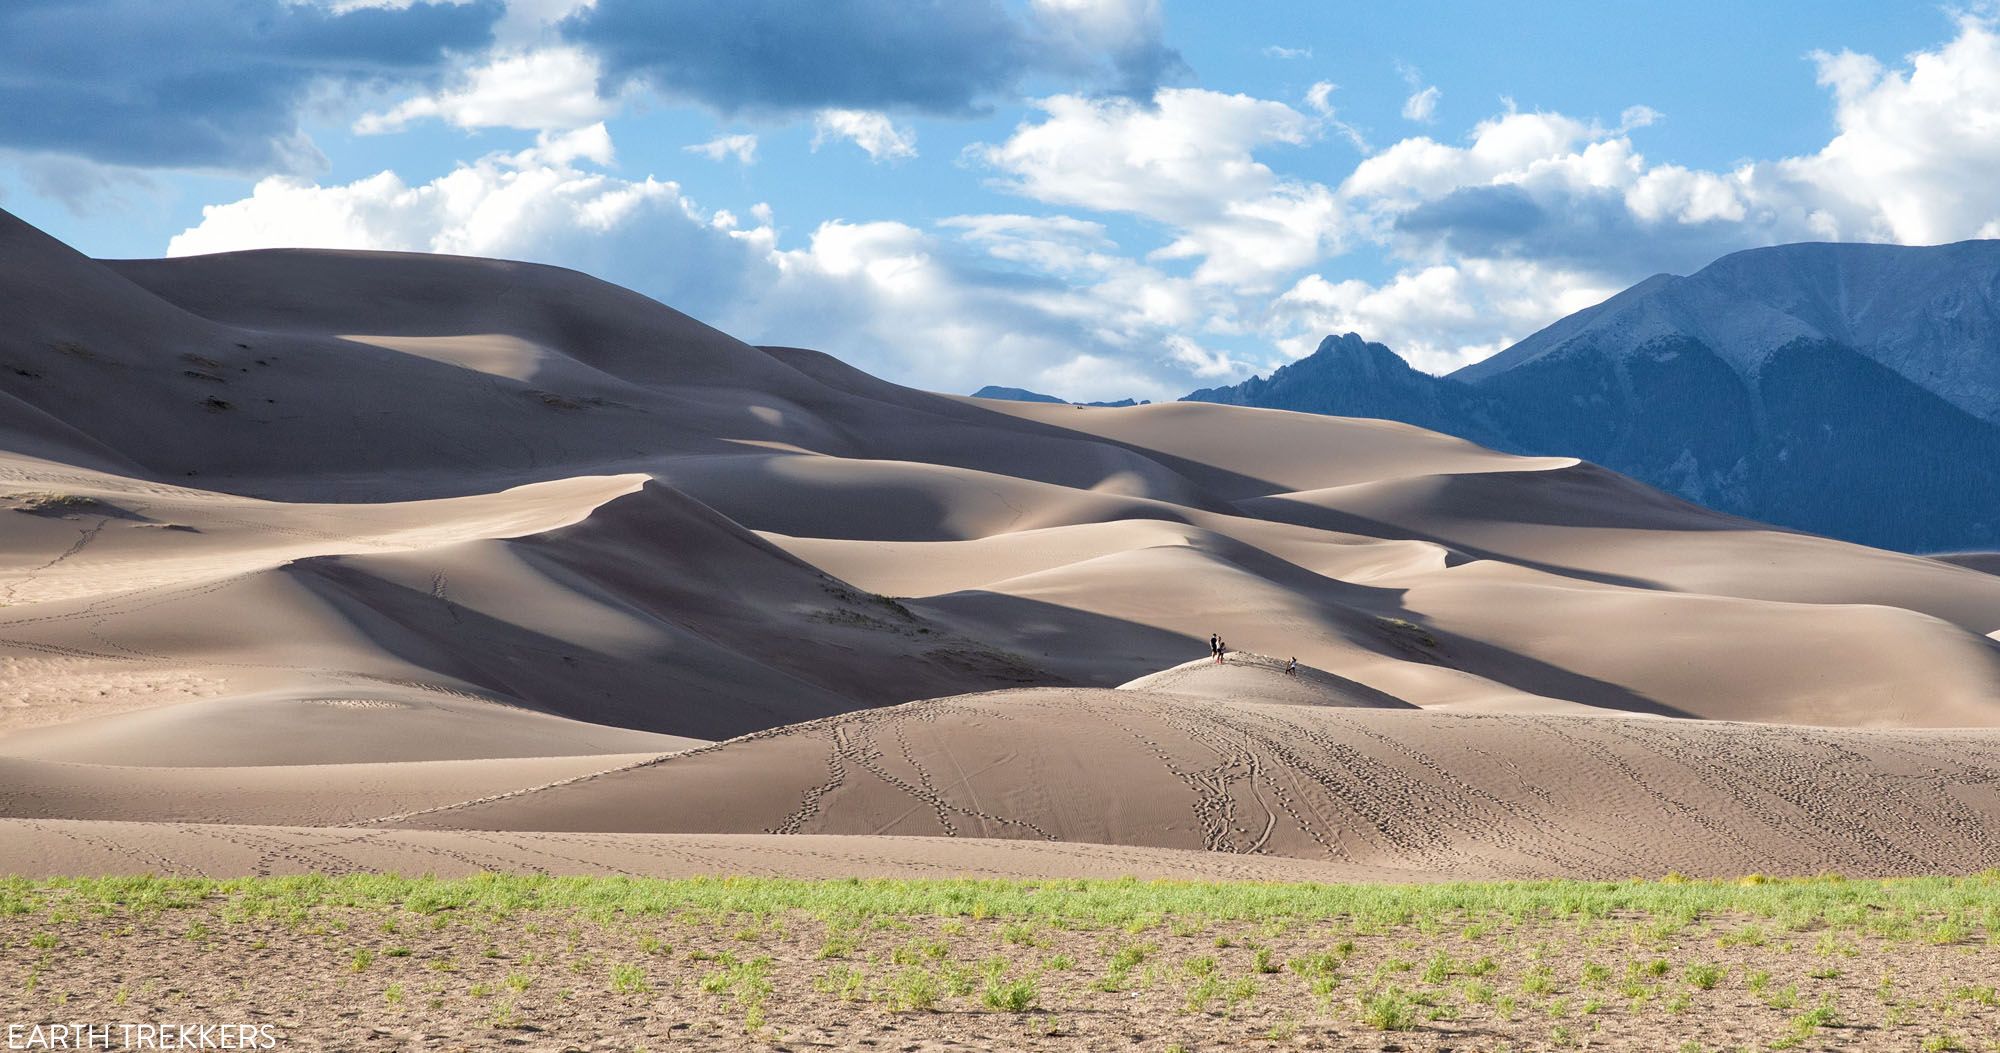 Featured image for “8 Amazing Things to Do at Great Sand Dunes National Park”